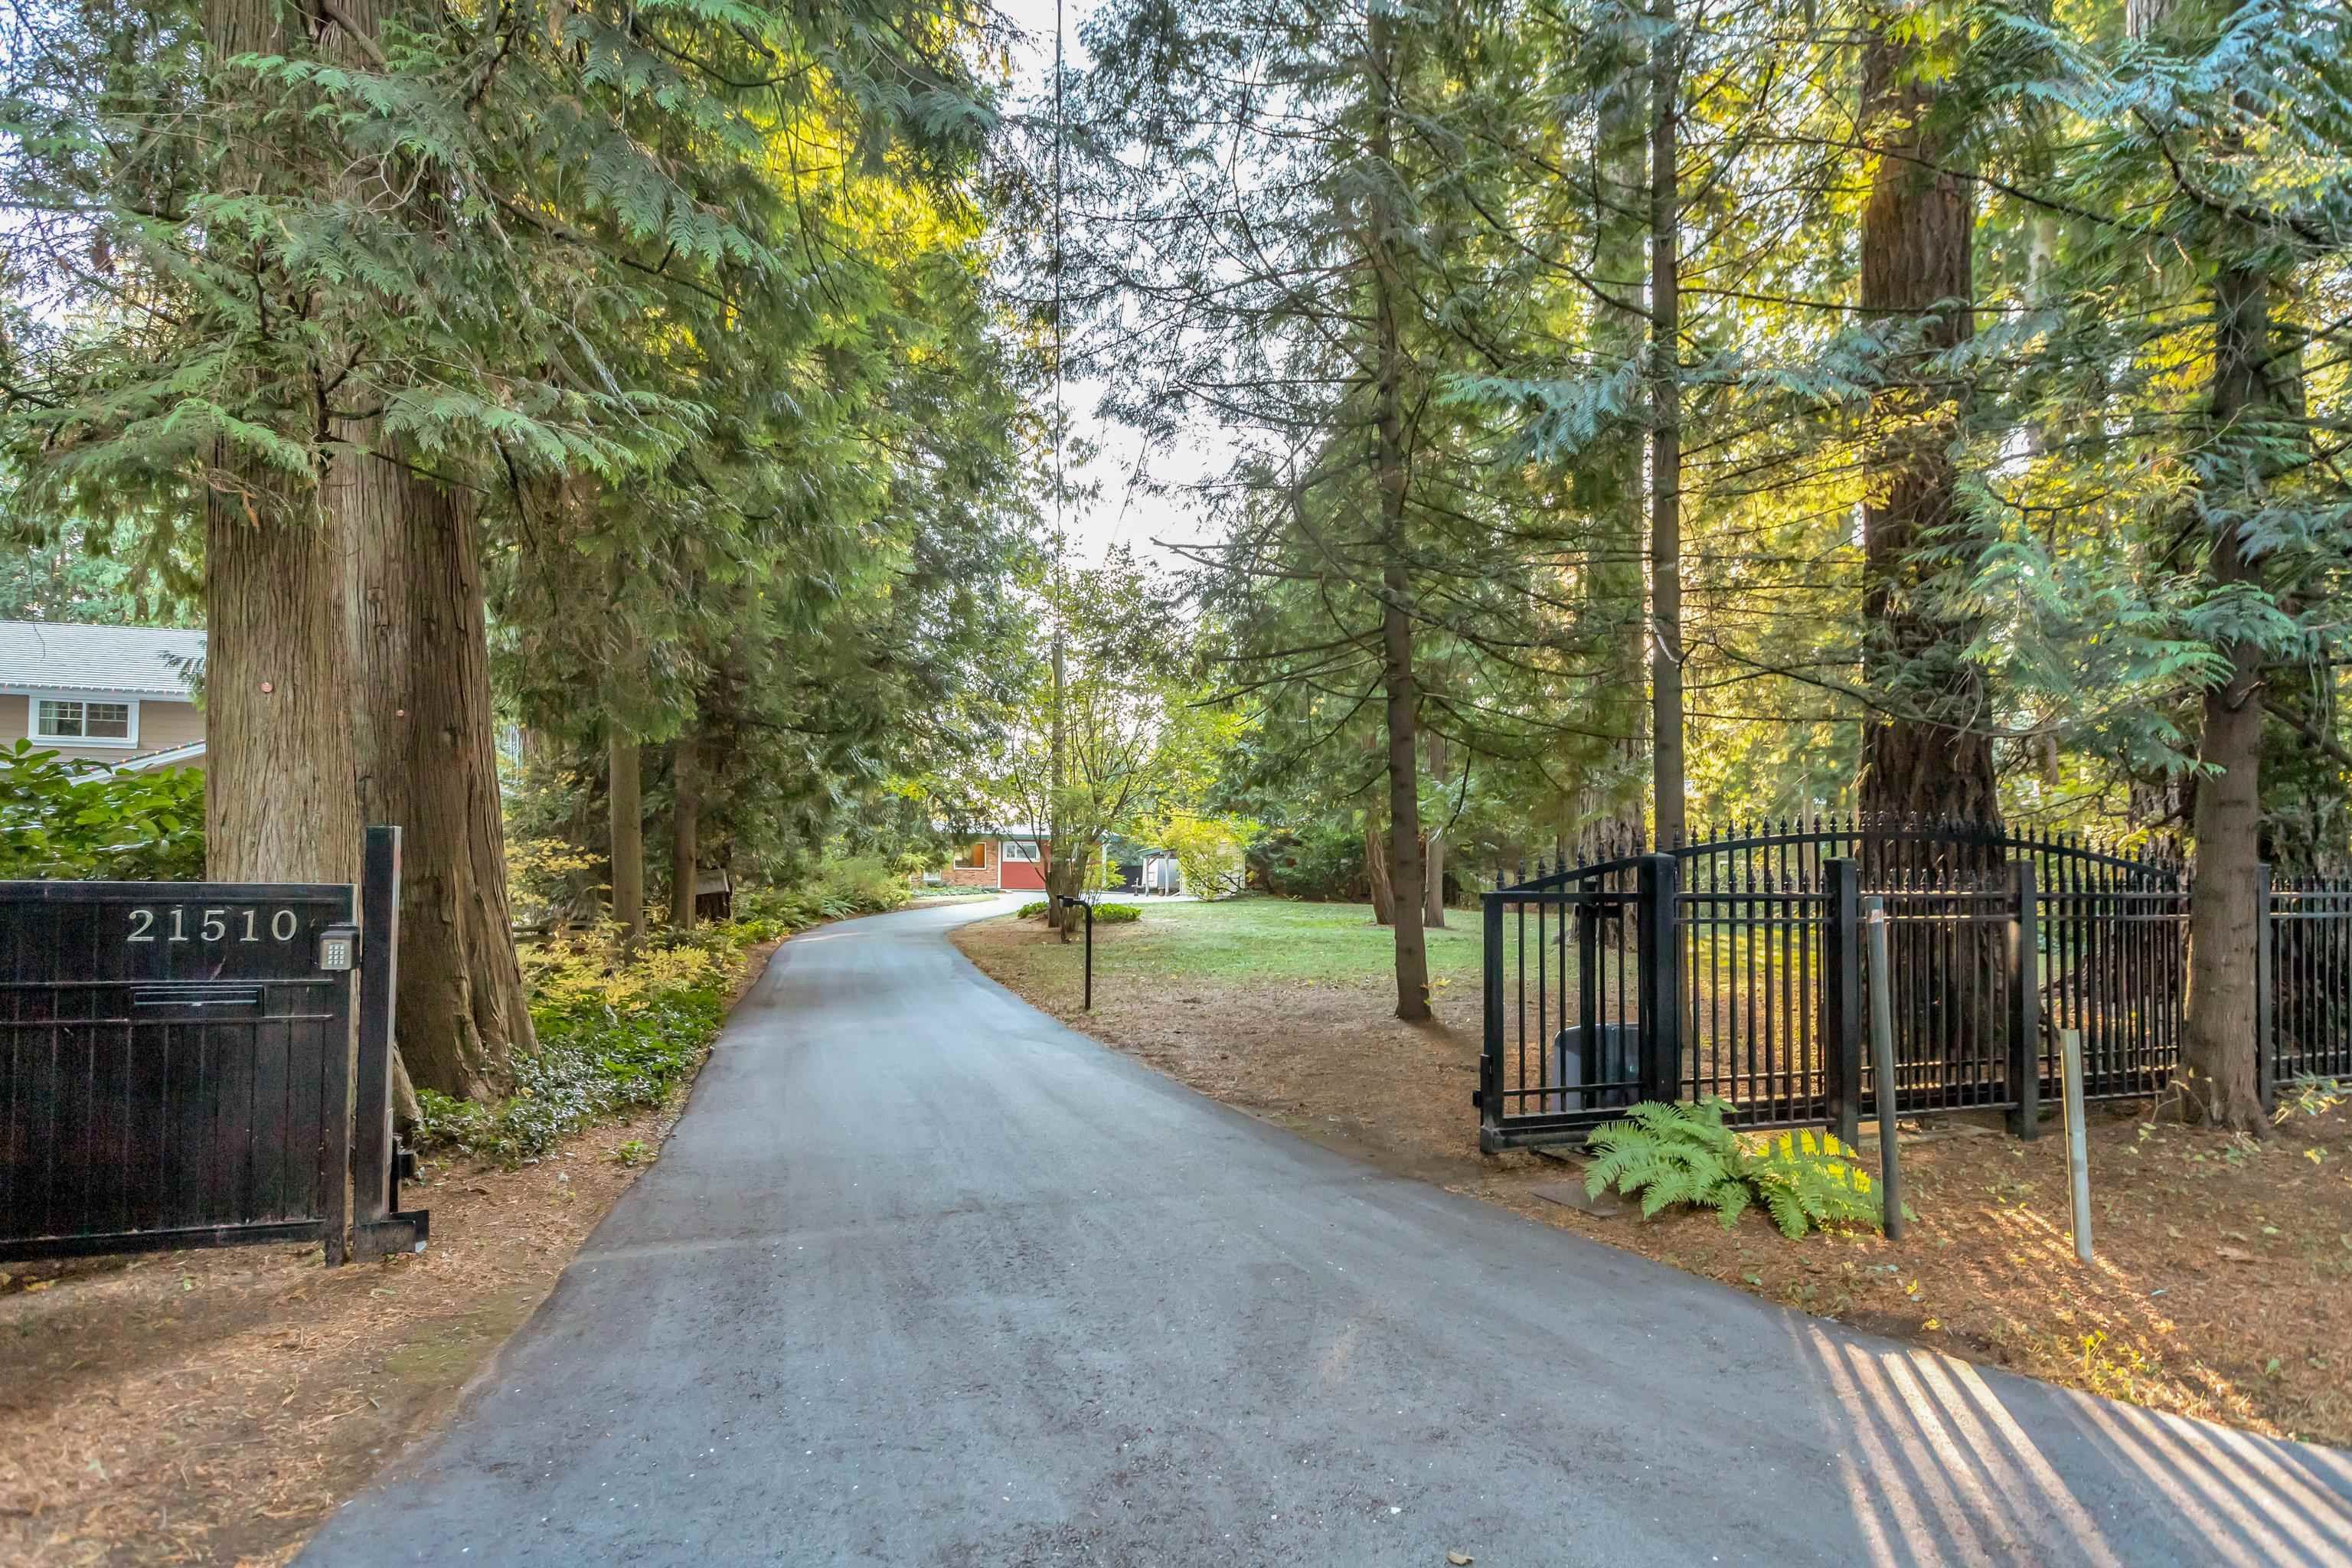 Gated entry to your private flat 3/4 acre estate on Shady Lane- on city water and sewer